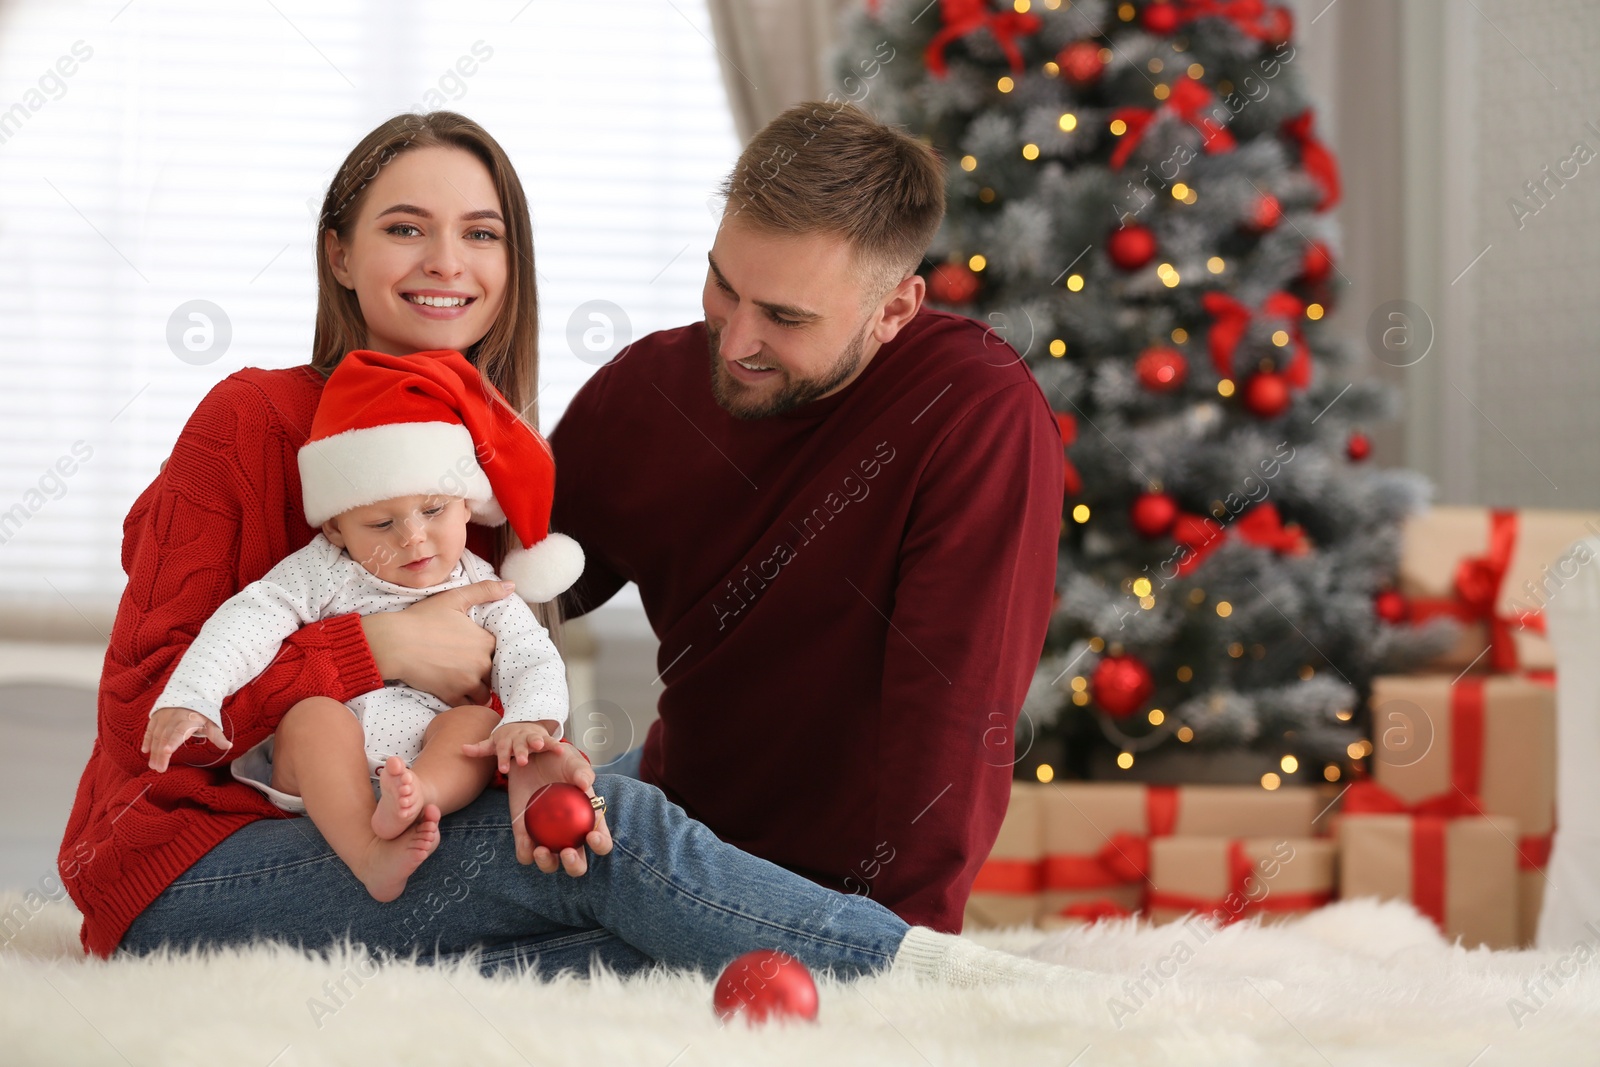 Photo of Happy family with cute baby in room decorated for Christmas holiday